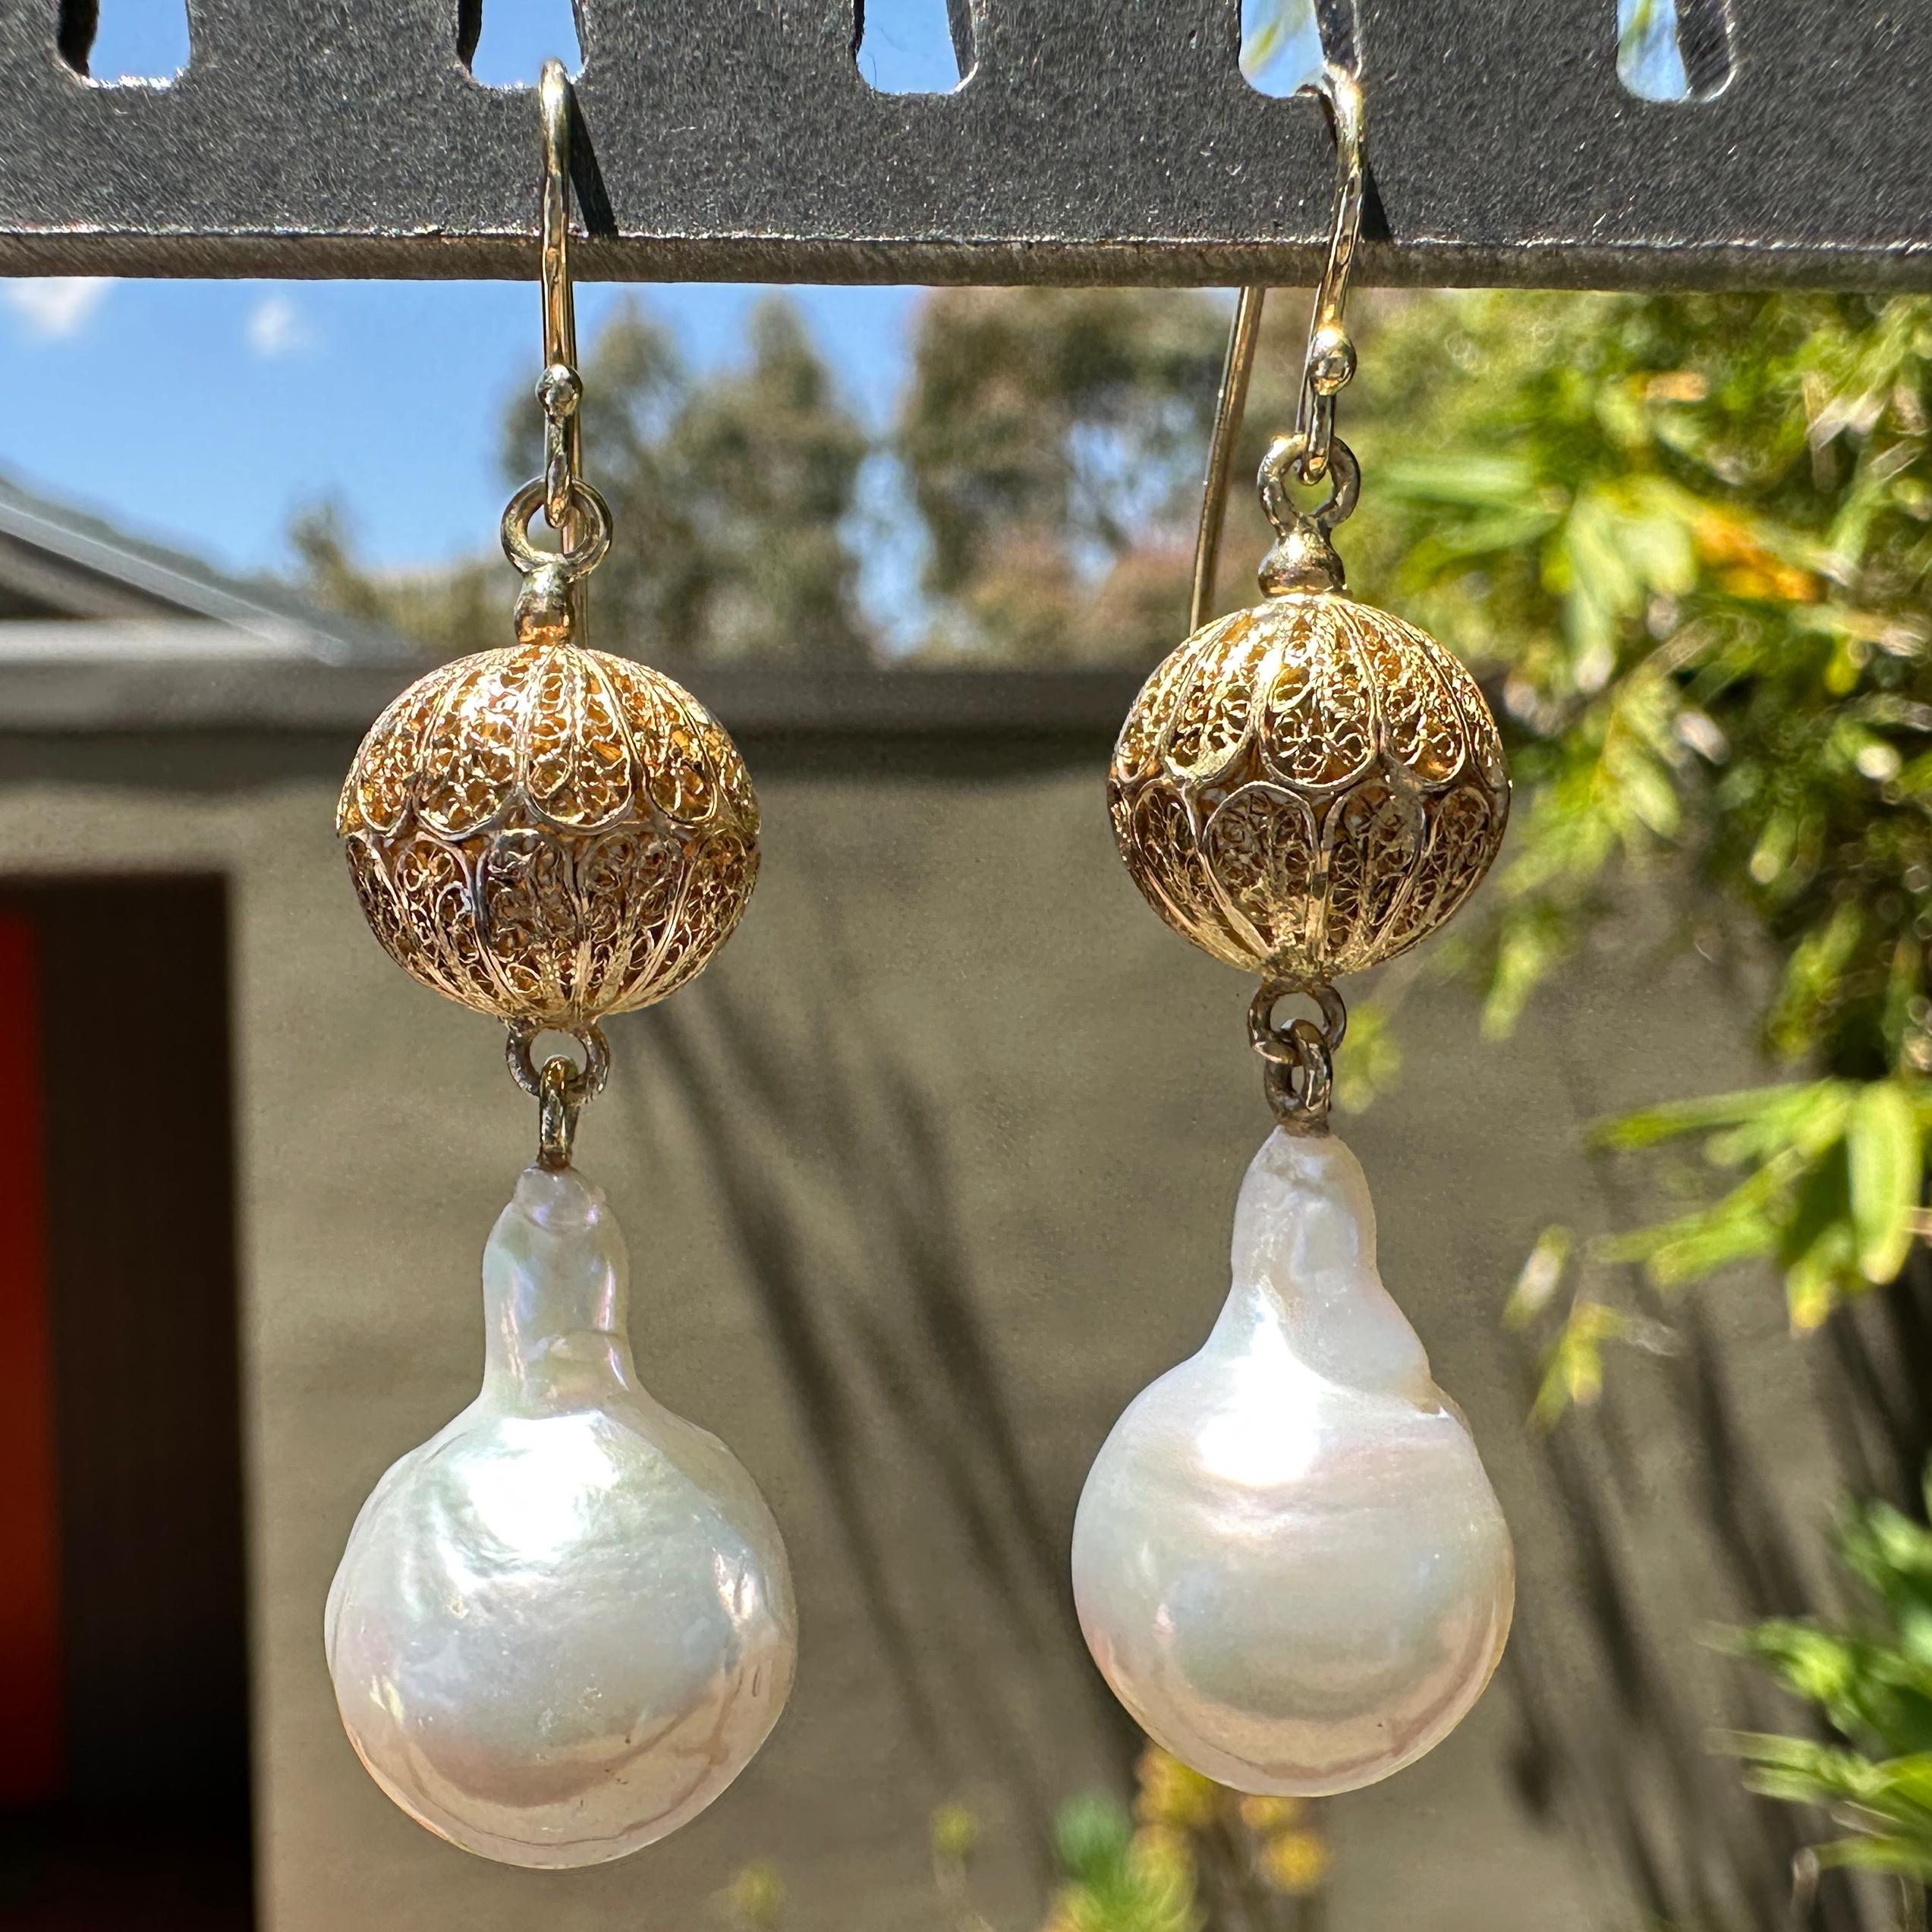 Dangle Wire Hook Earrings with Baroque Freshwater Pearls and 22K Gold Beads For Sale 1